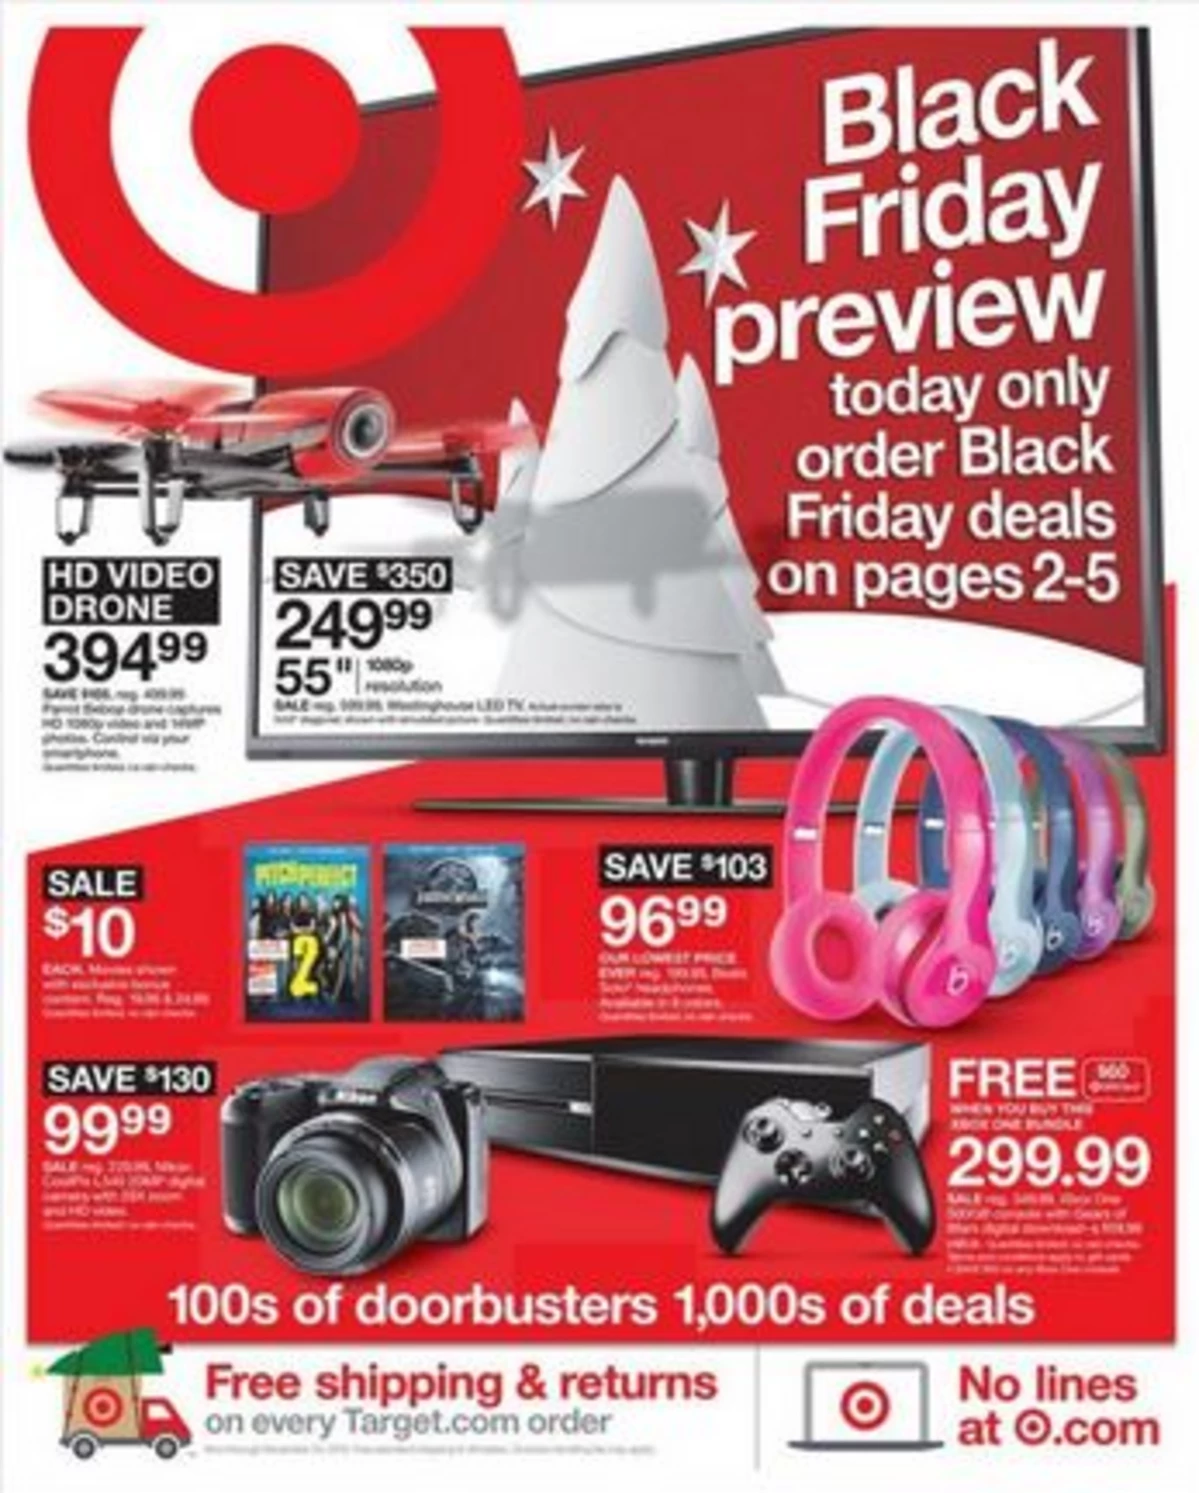 See All 40 Pages Of Target's Black Friday Deals